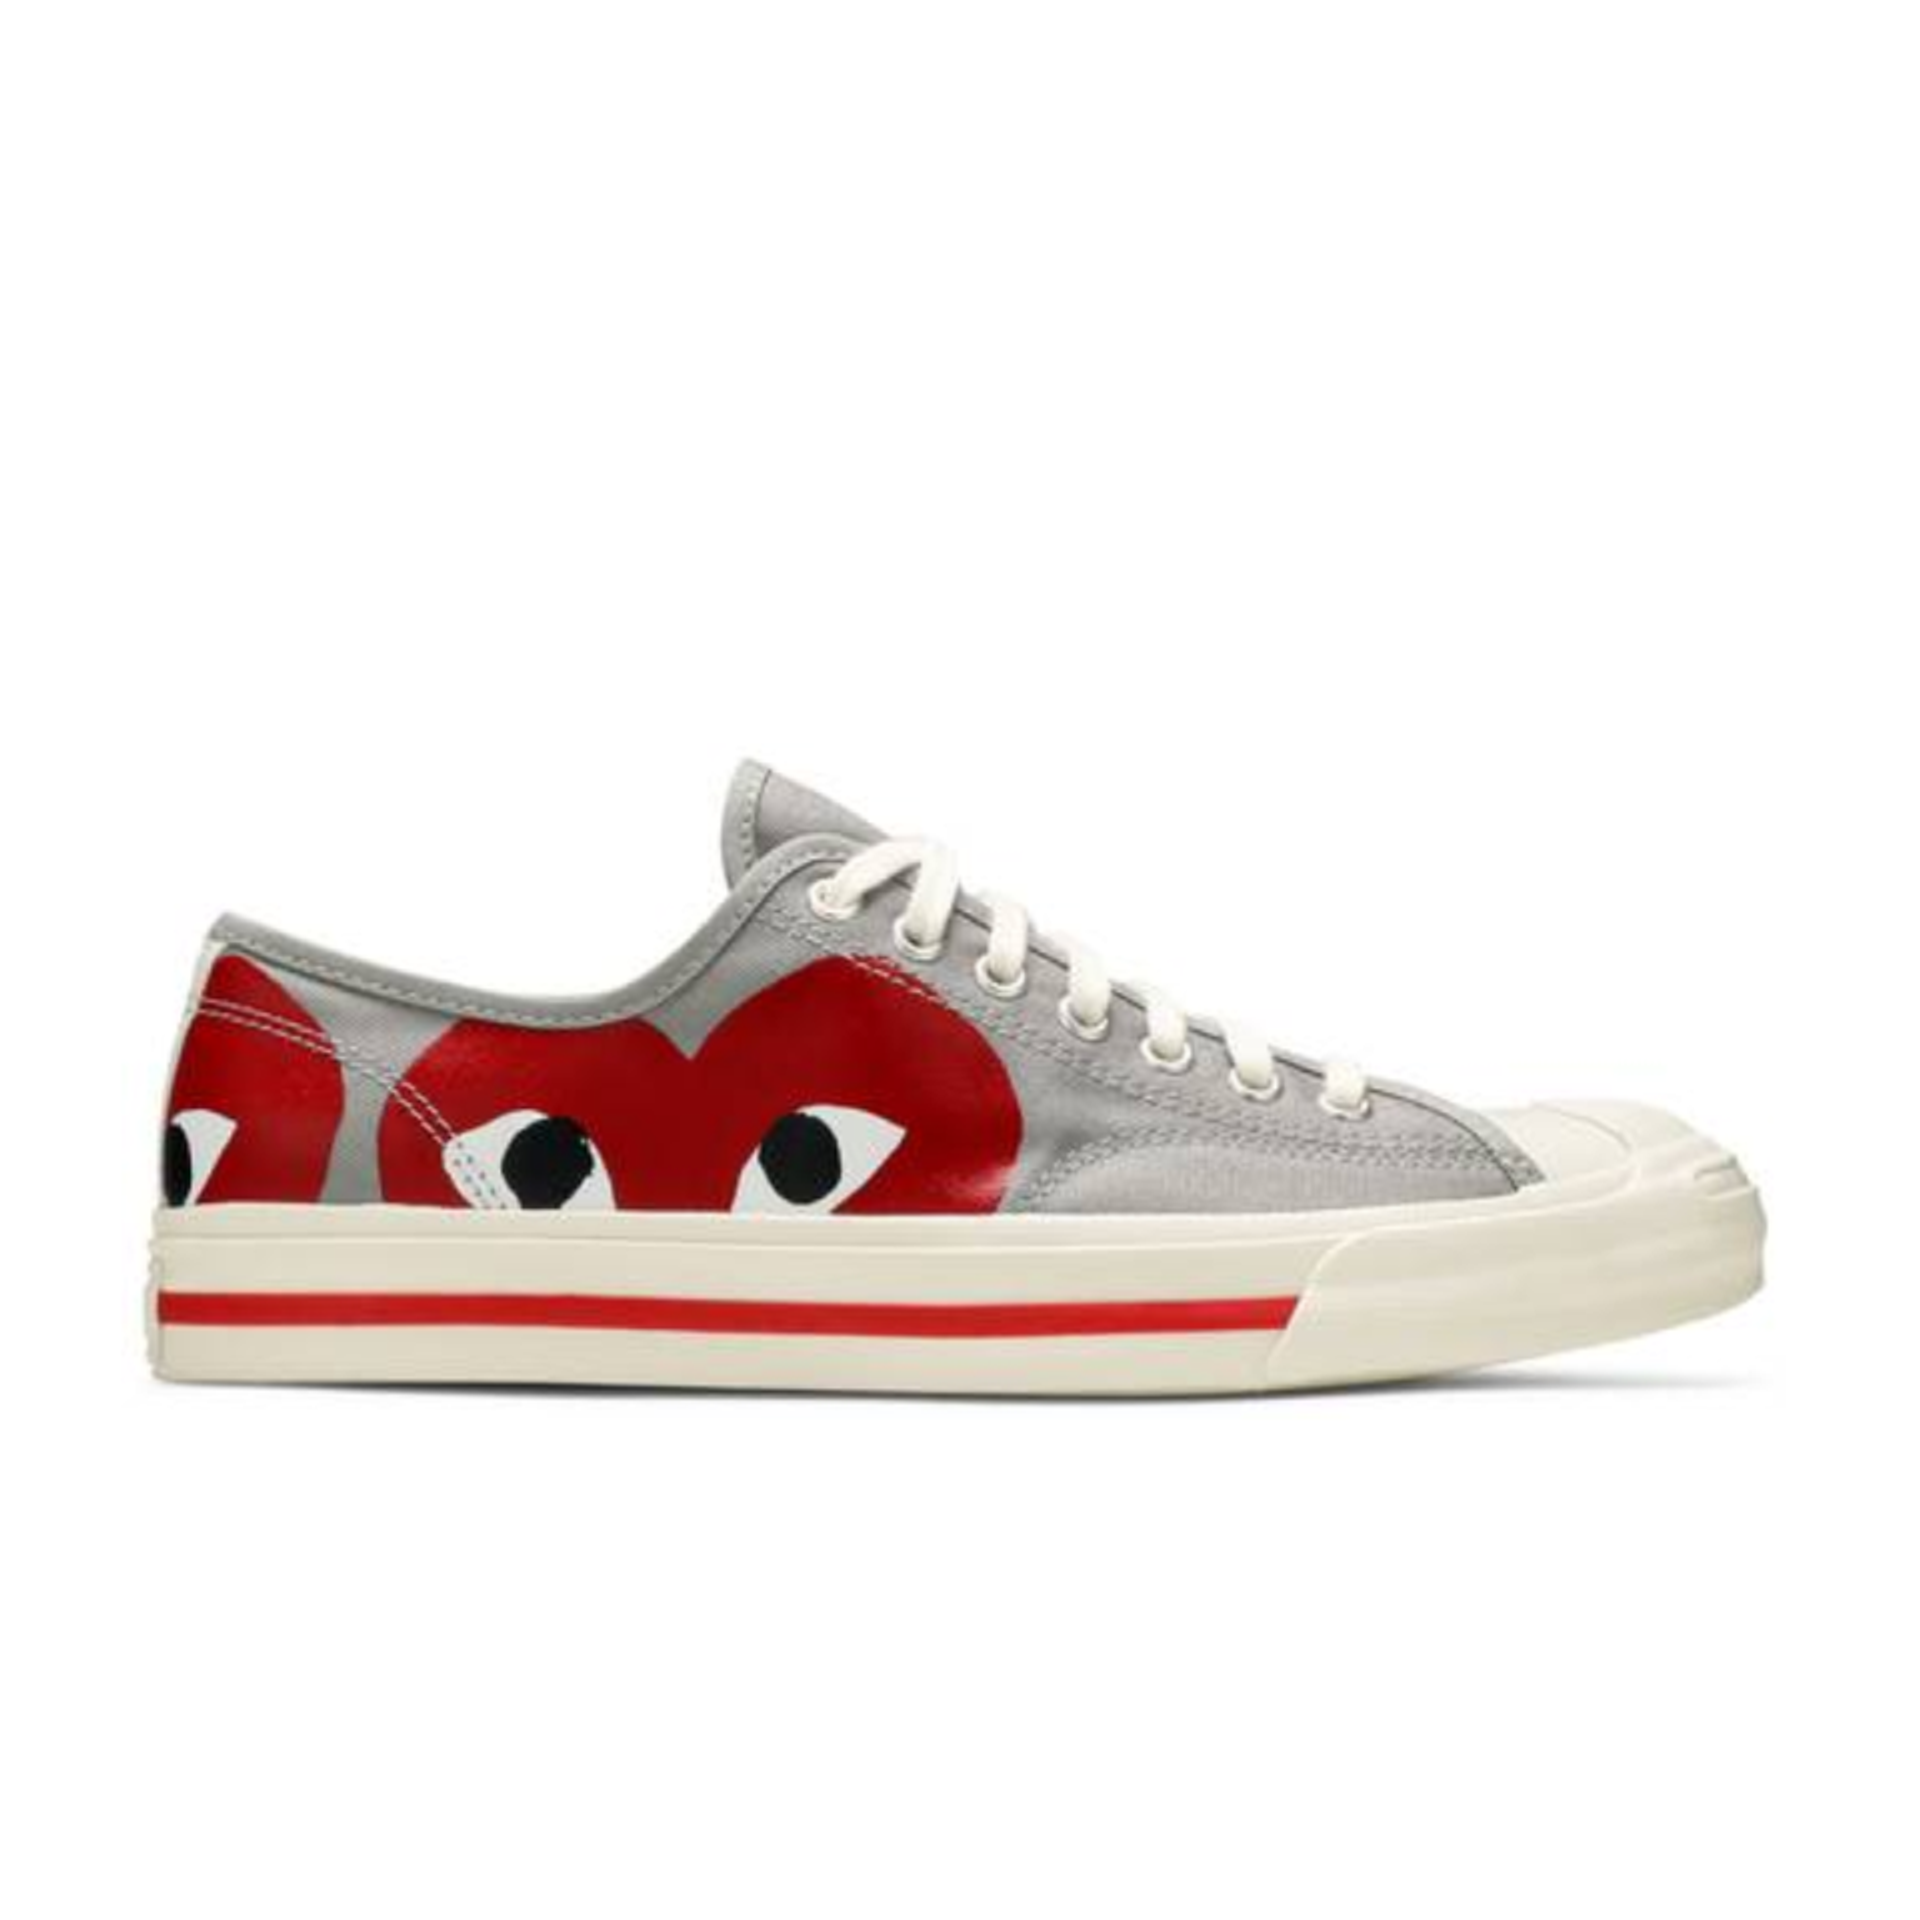 Converse Comme des Garçons PLAY x Jack Purcell 'Drizzle Red'